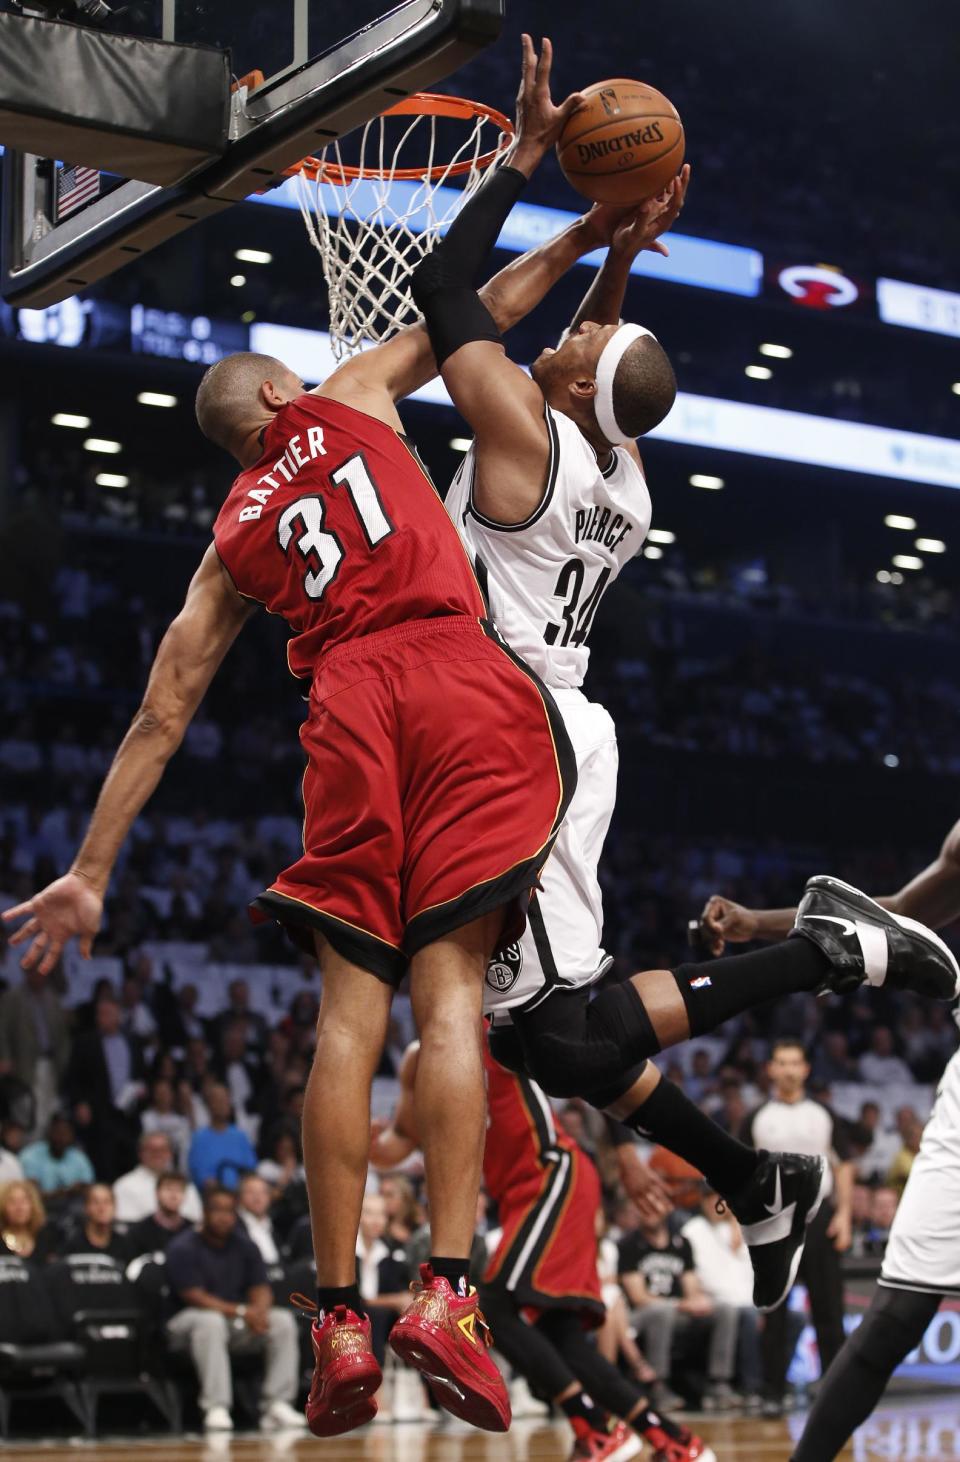 Miami Heat forward Shane Battier (31) defends Brooklyn Nets forward Paul Pierce (34) in the first half of Game 4 of a second-round NBA playoff basketball game at the Barclays Center, Monday, May 12, 2014, in New York. (AP Photo)